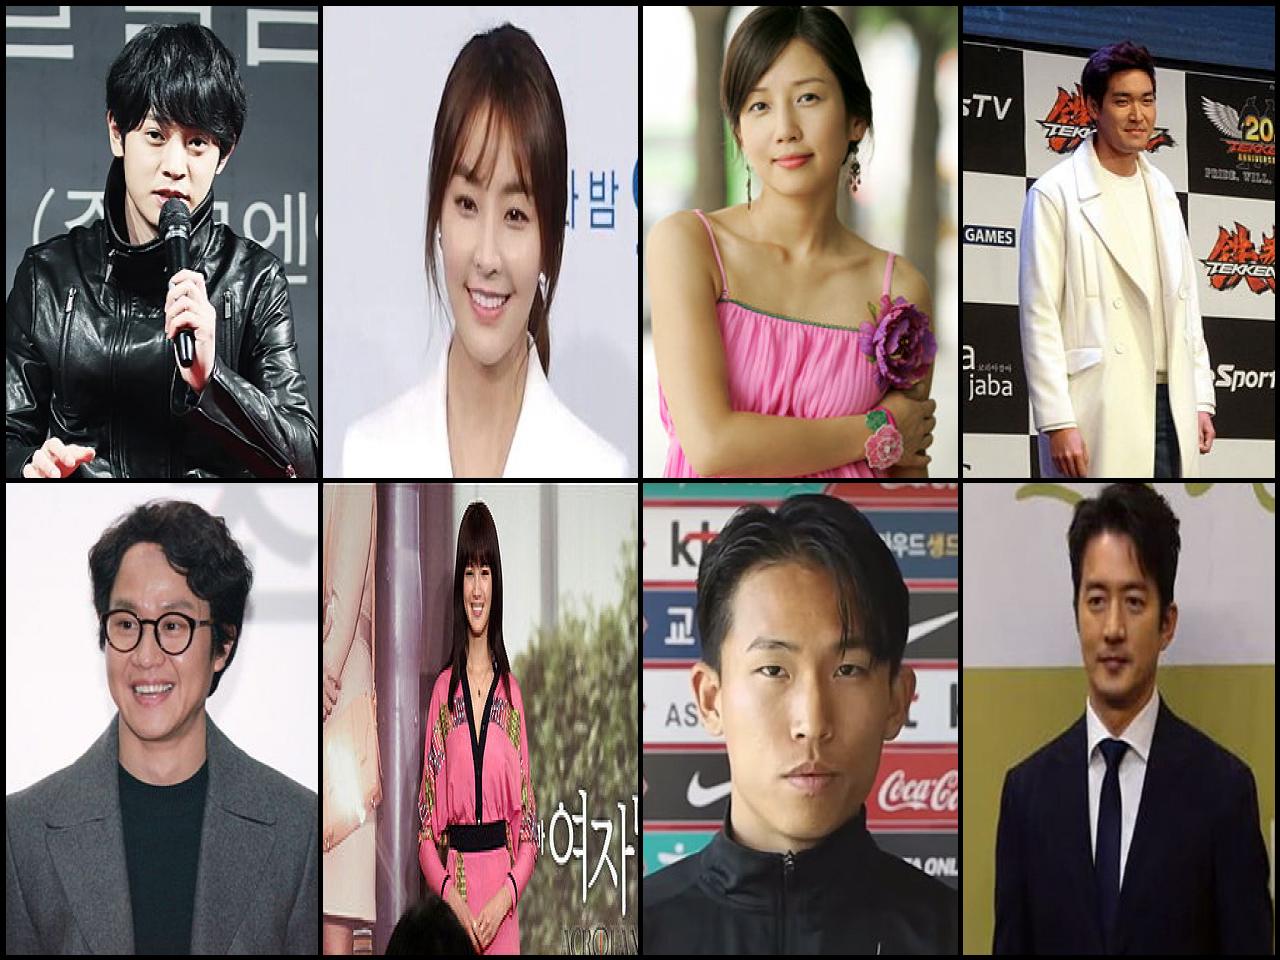 List of Famous people named <b>Jeong</b>